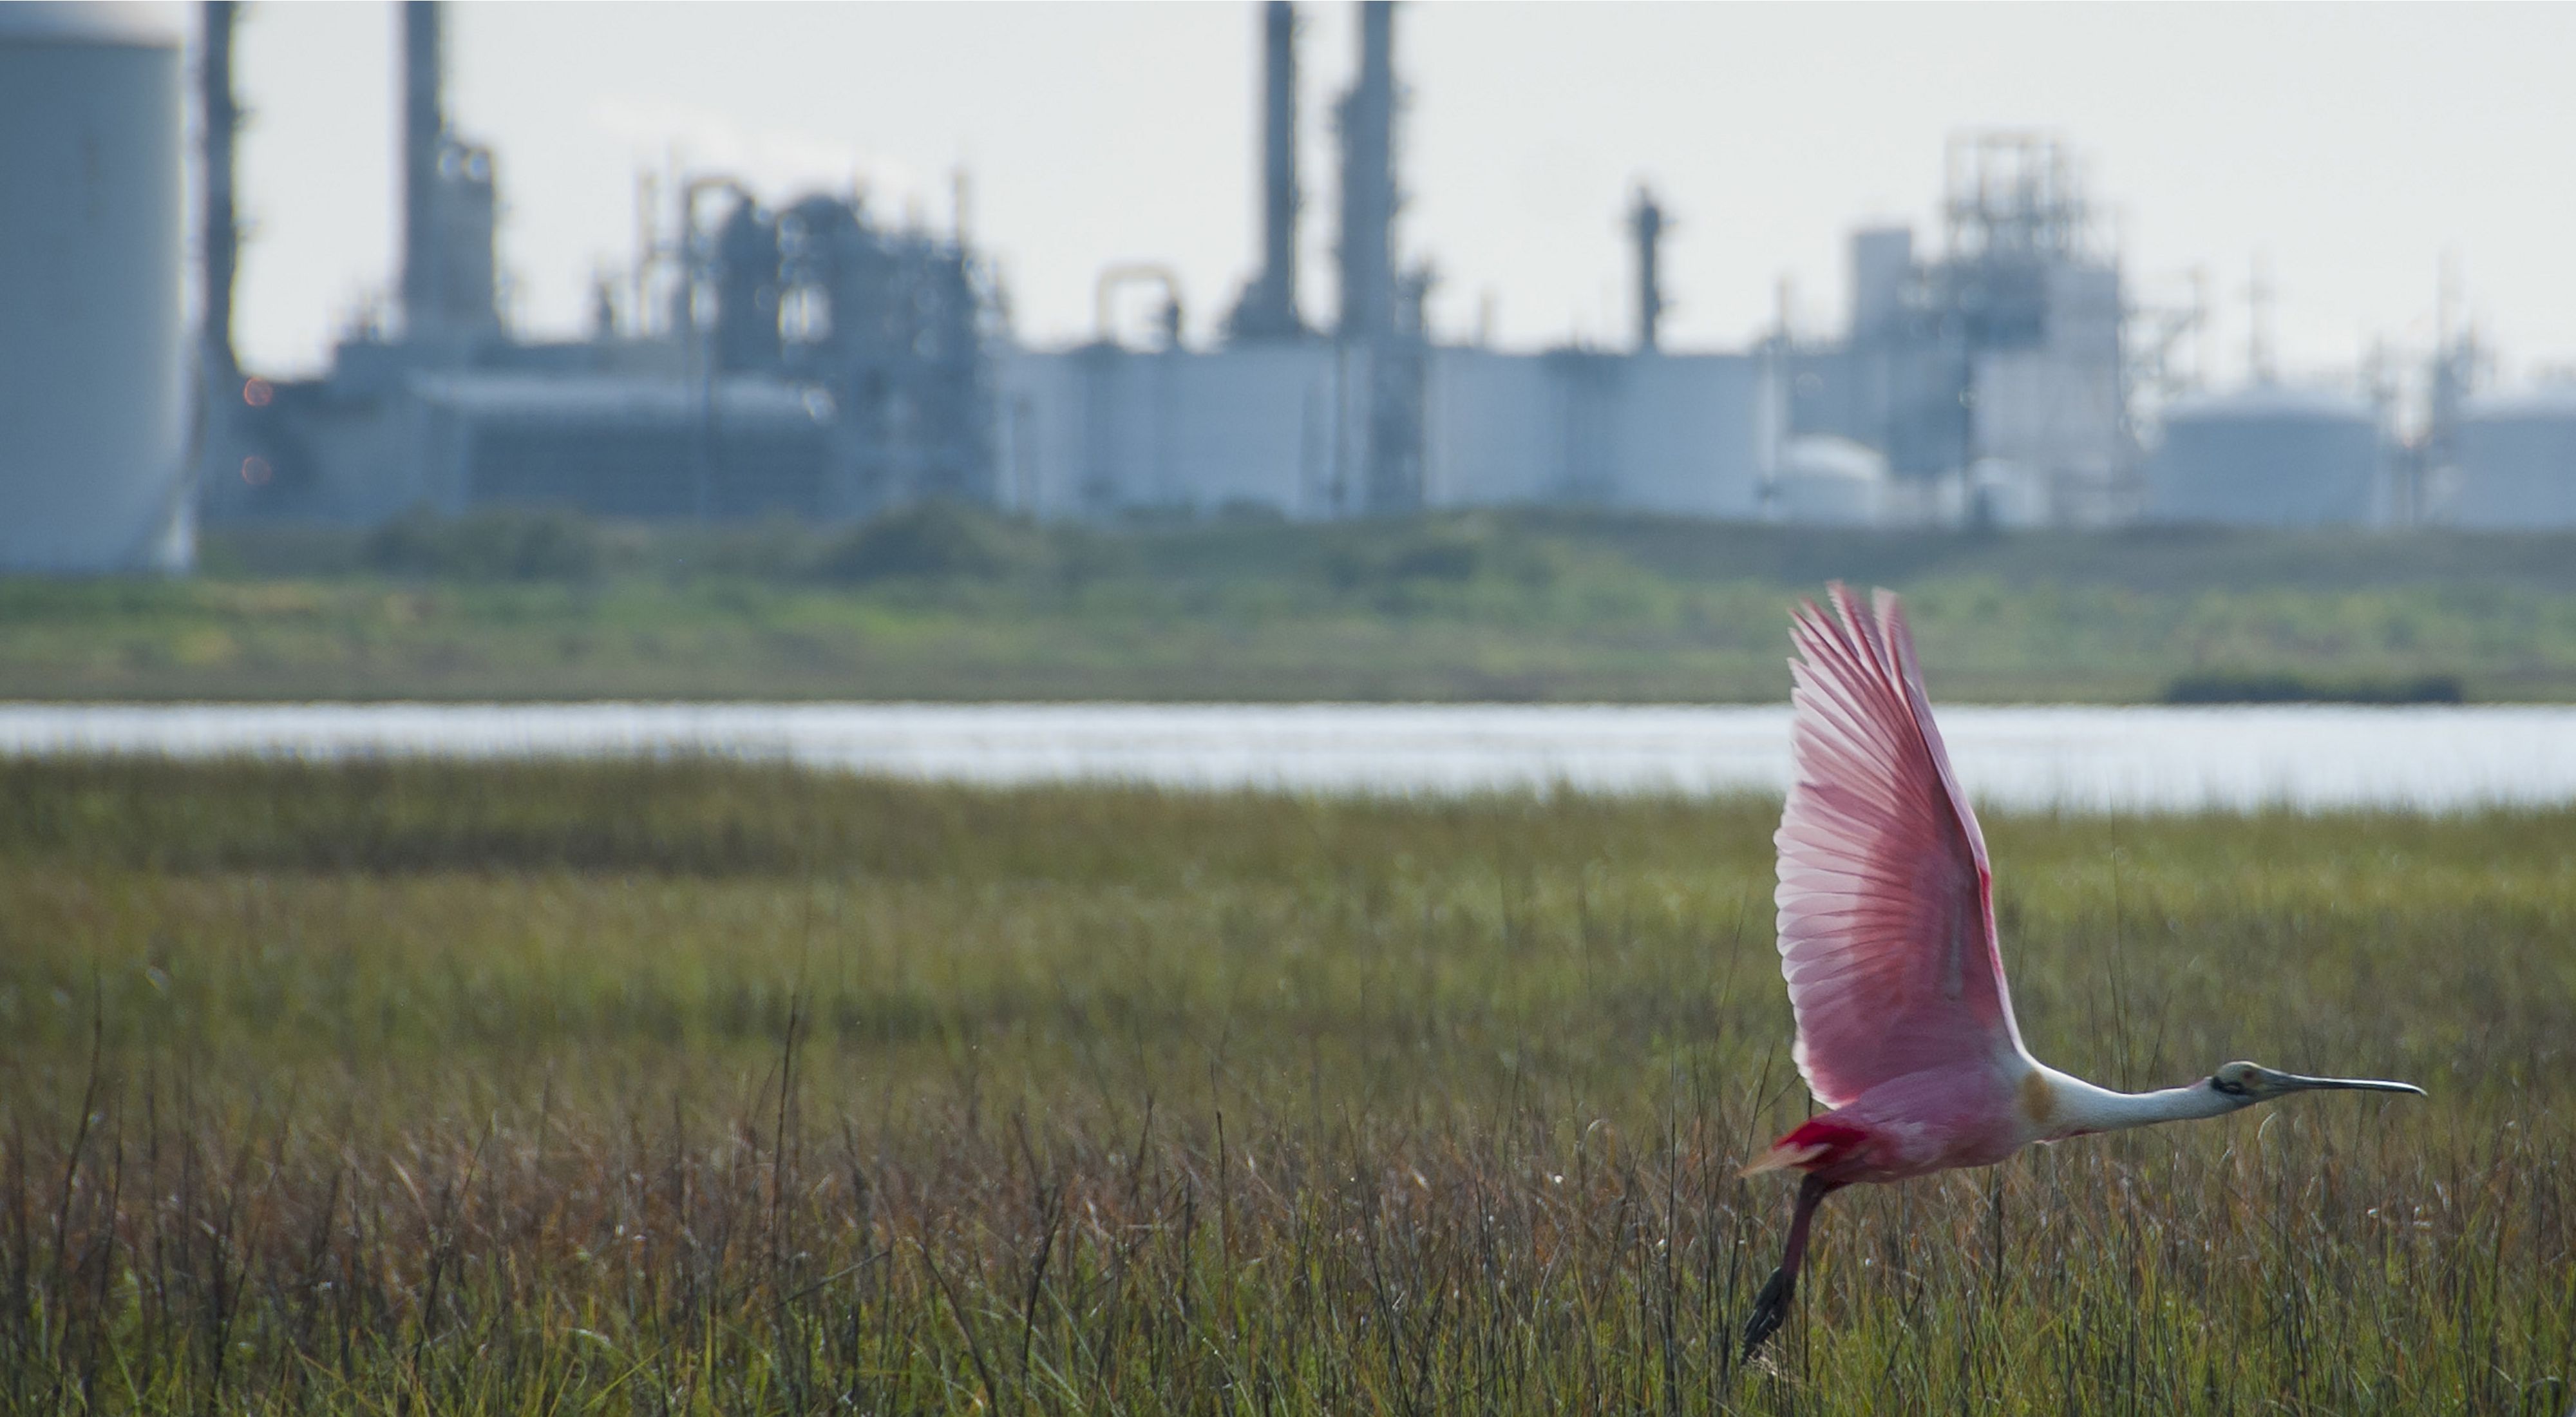 A pink bird flies over grasses in front of water and buildings.